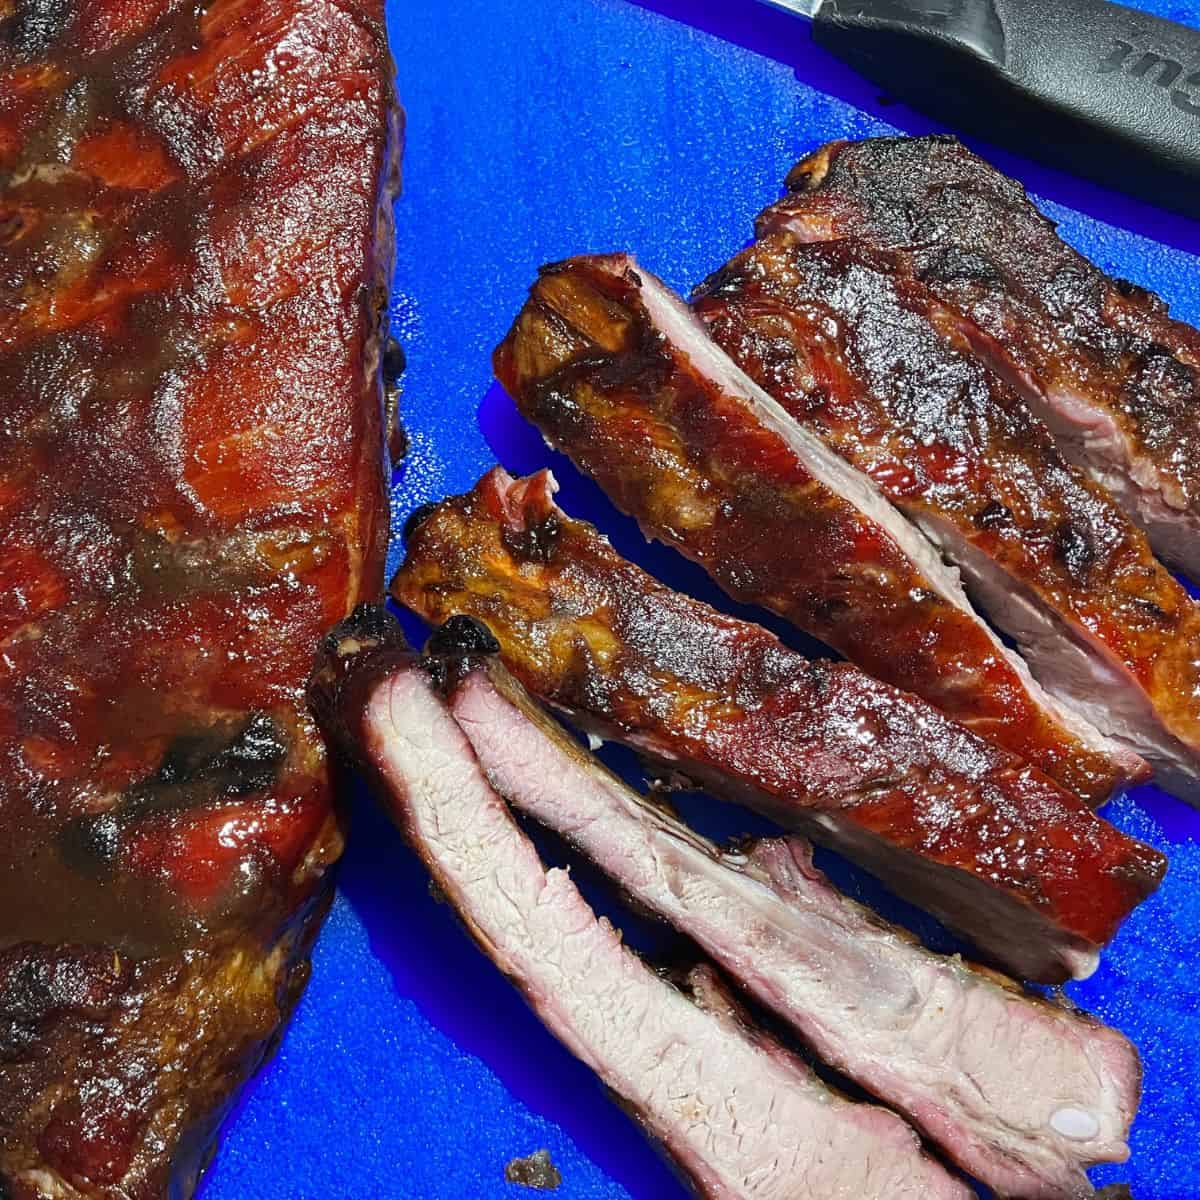 ribs ready to eat sitting on blue cutting board